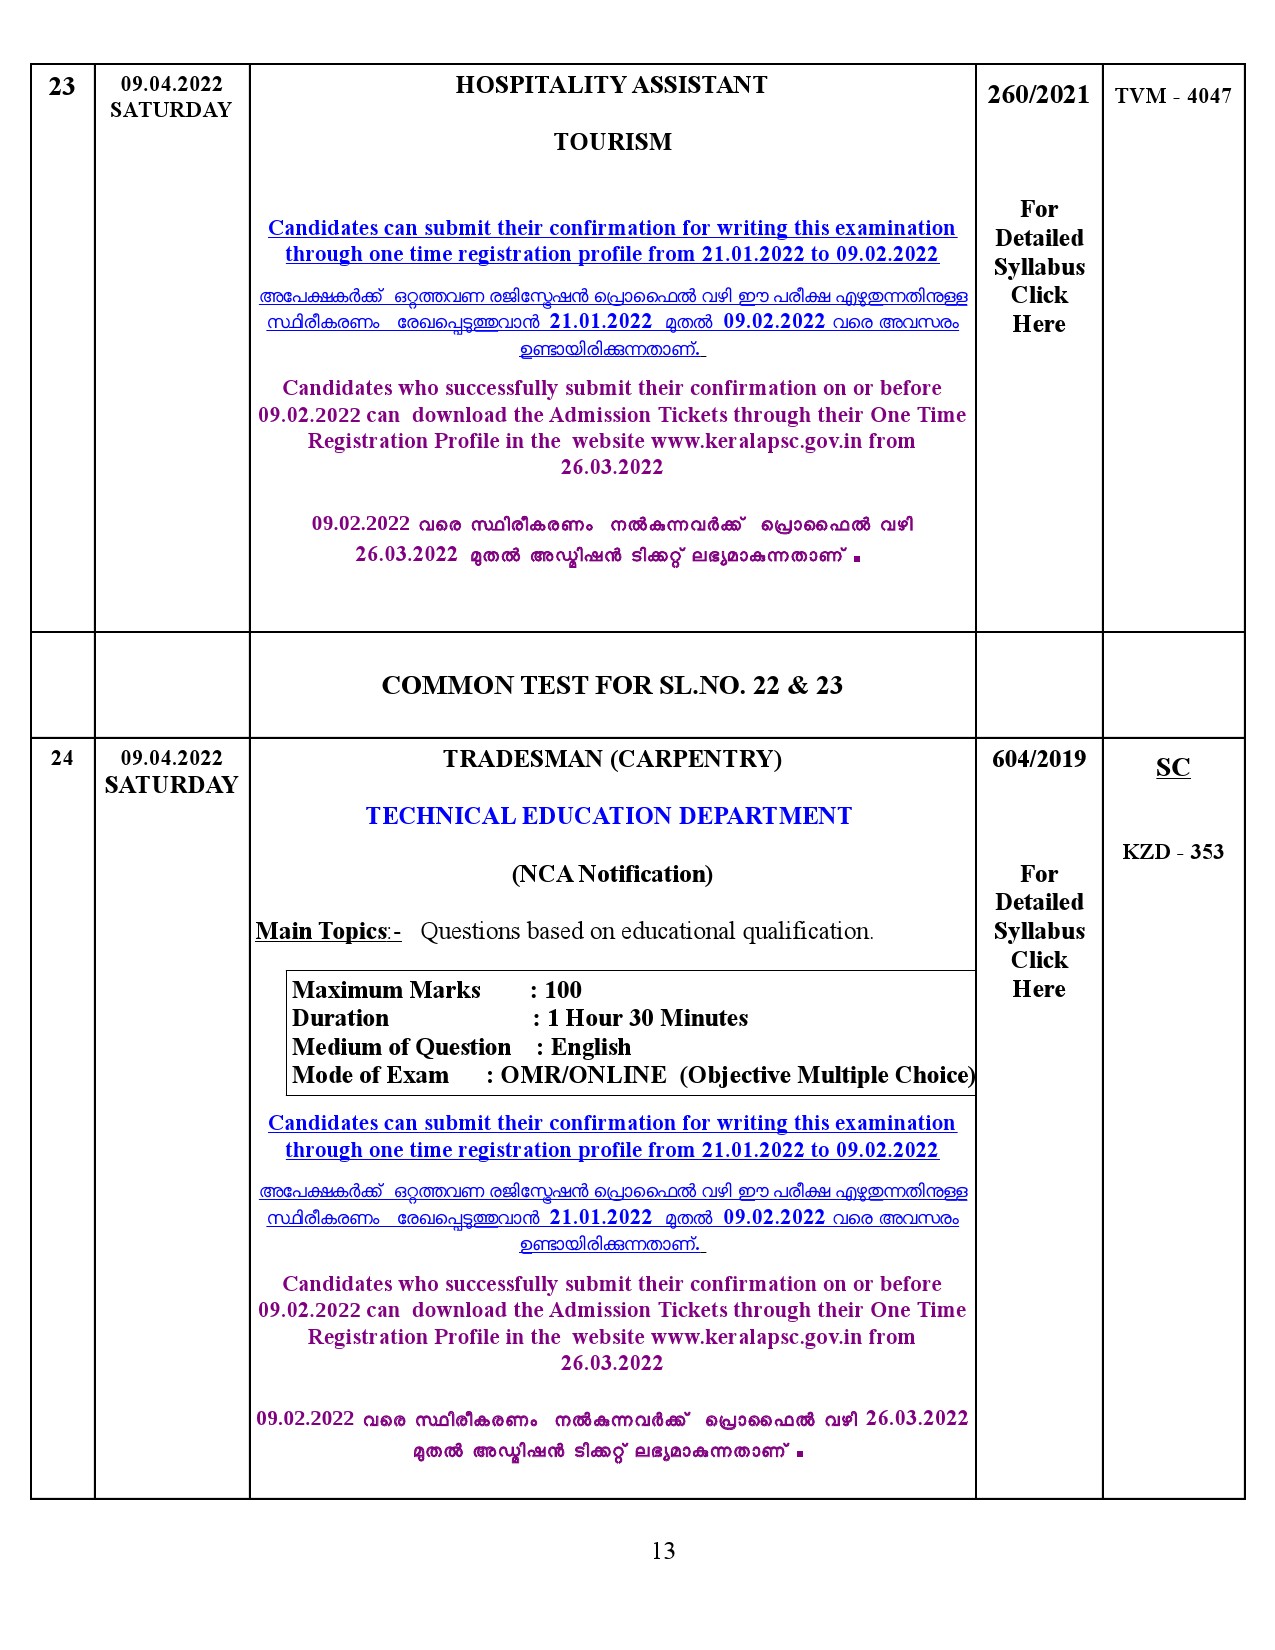 Examination Programme For The Month Of April 2022 - Notification Image 13